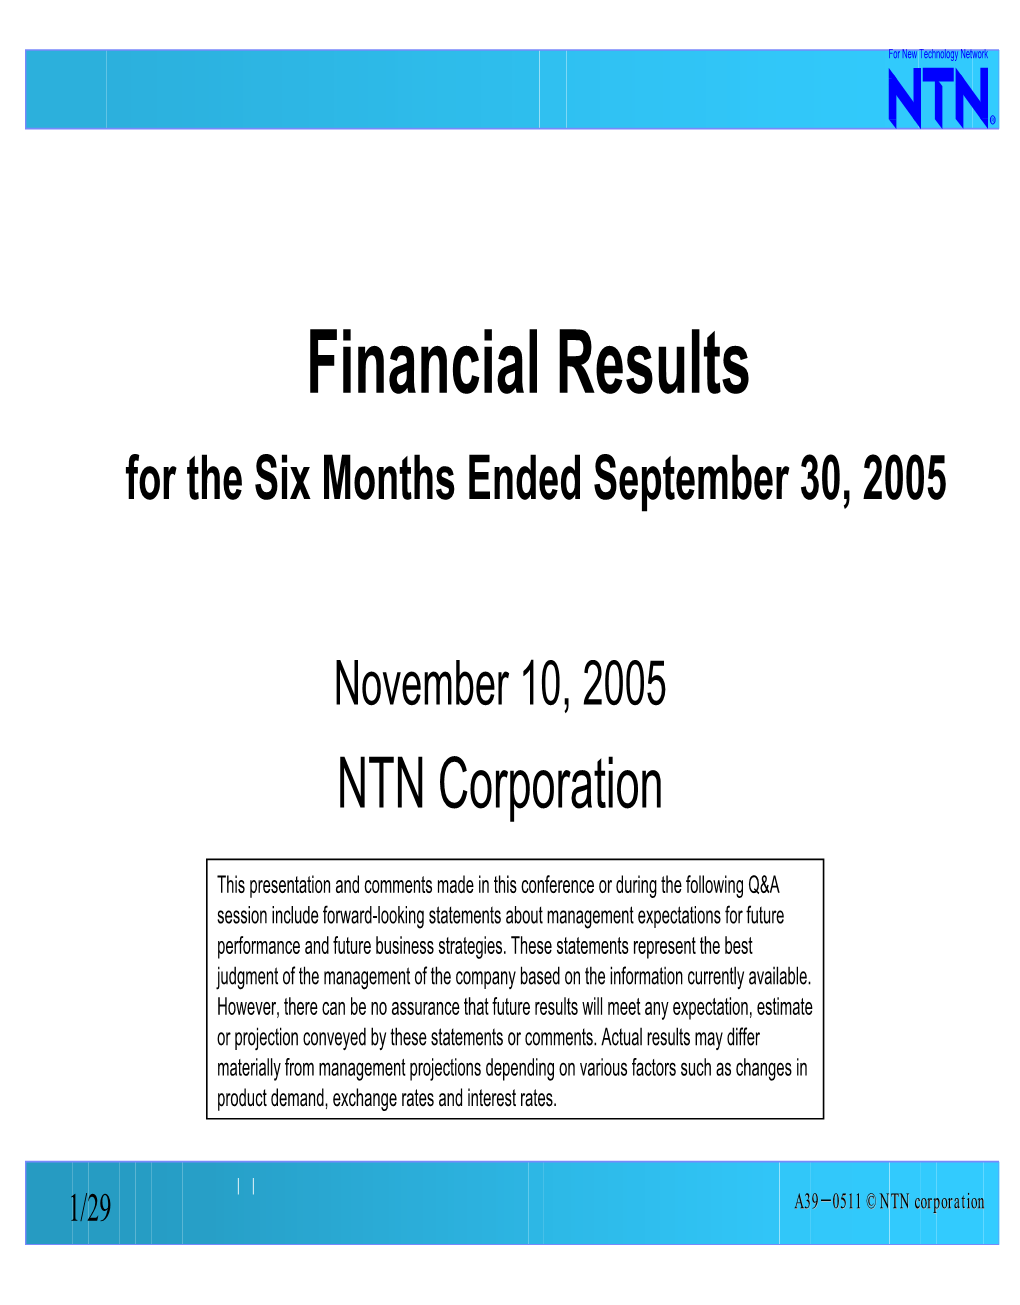 Financial Results for the Six Months Ended September 30, 2005